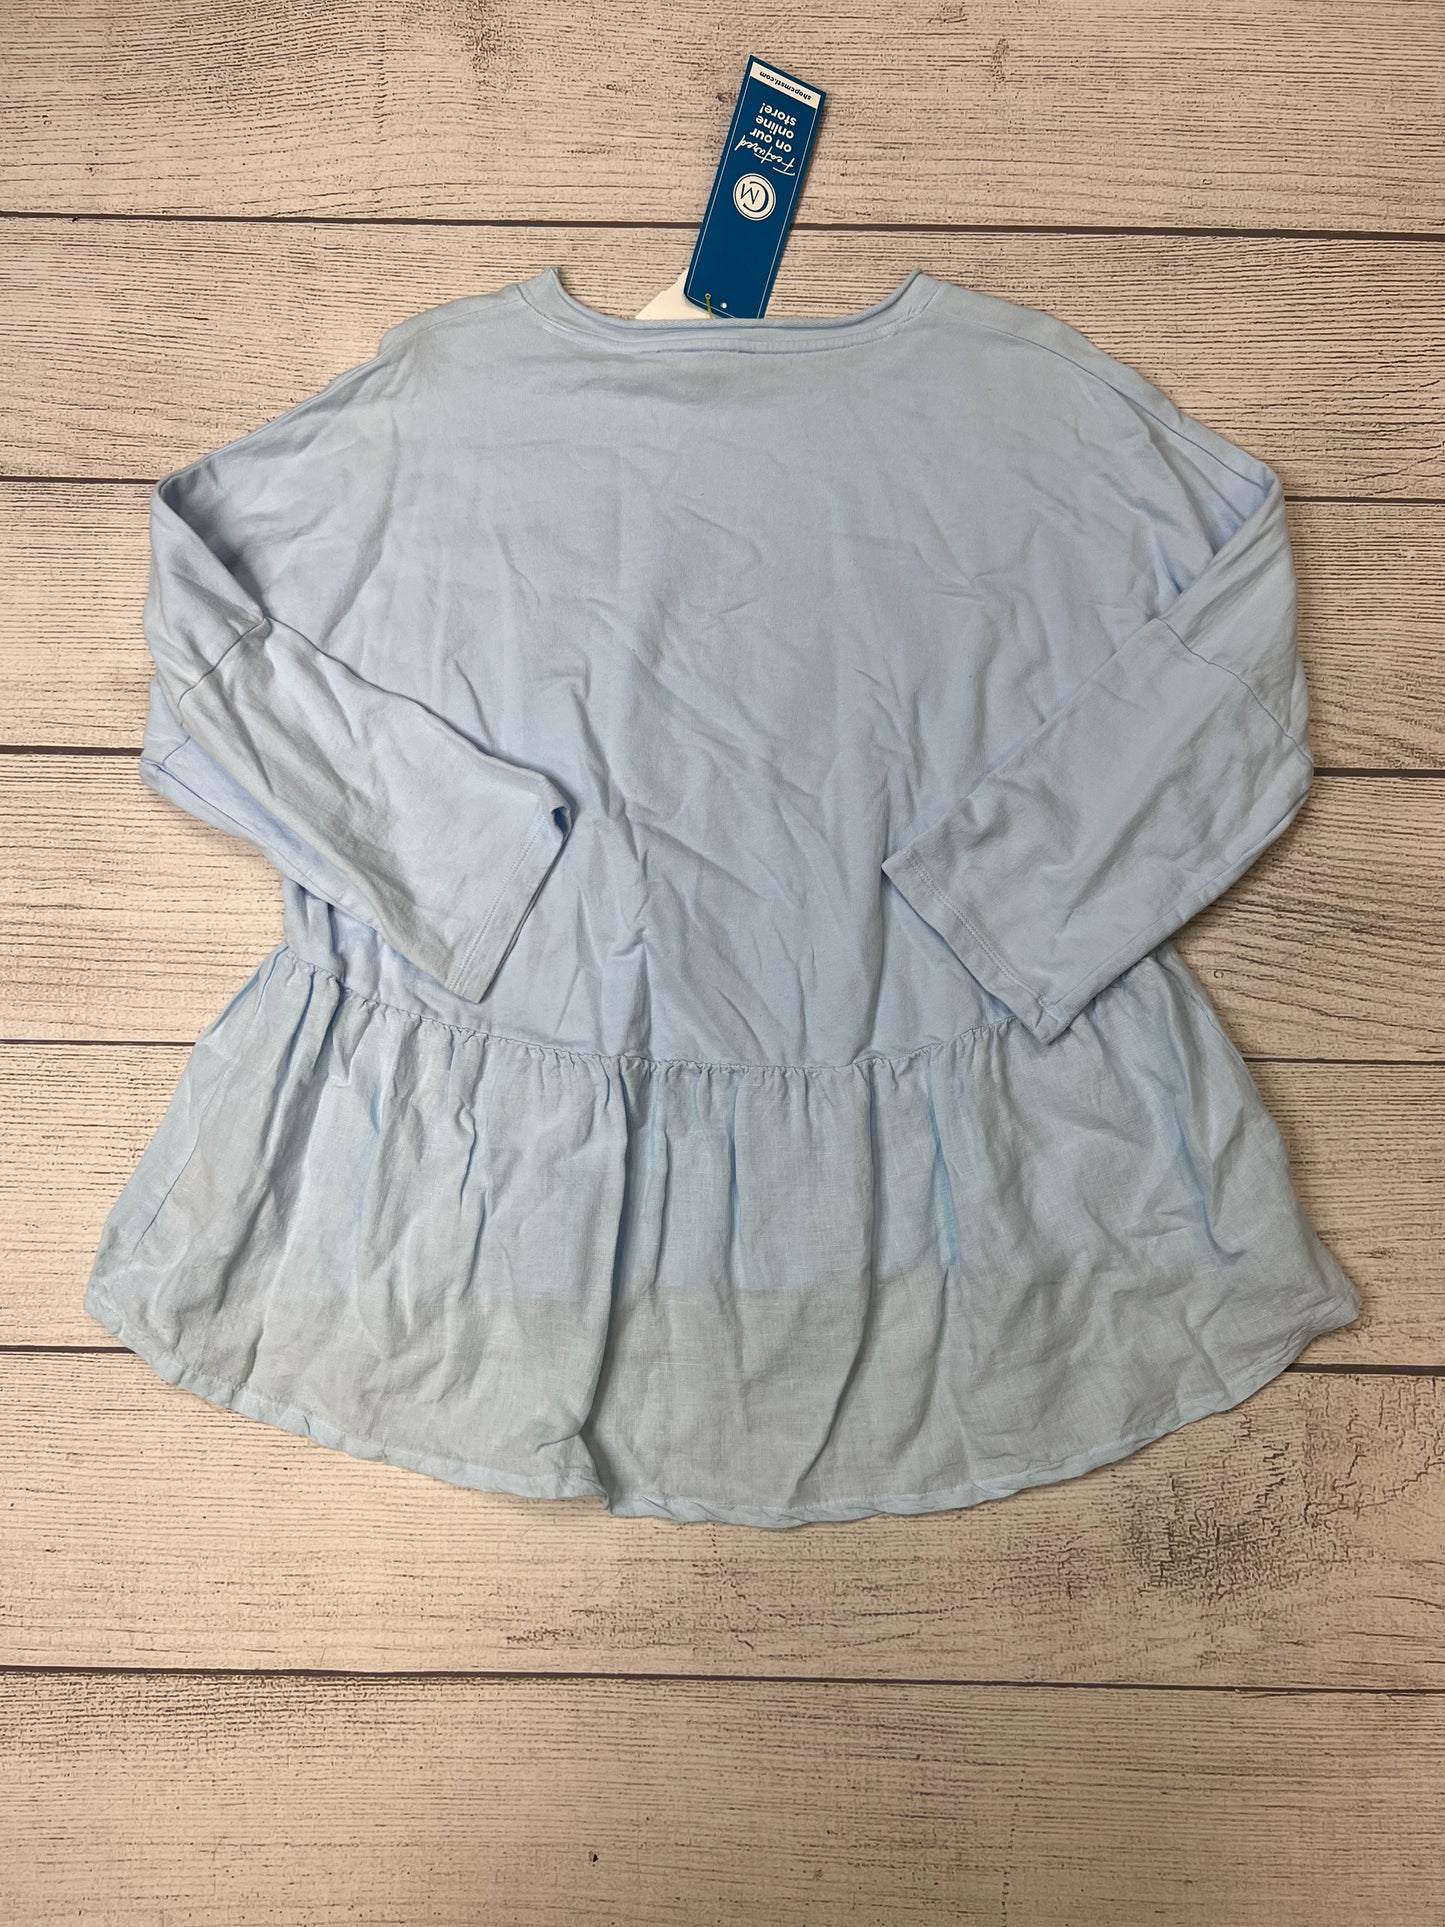 Blue Top Long Sleeve Anthropologie, Size M